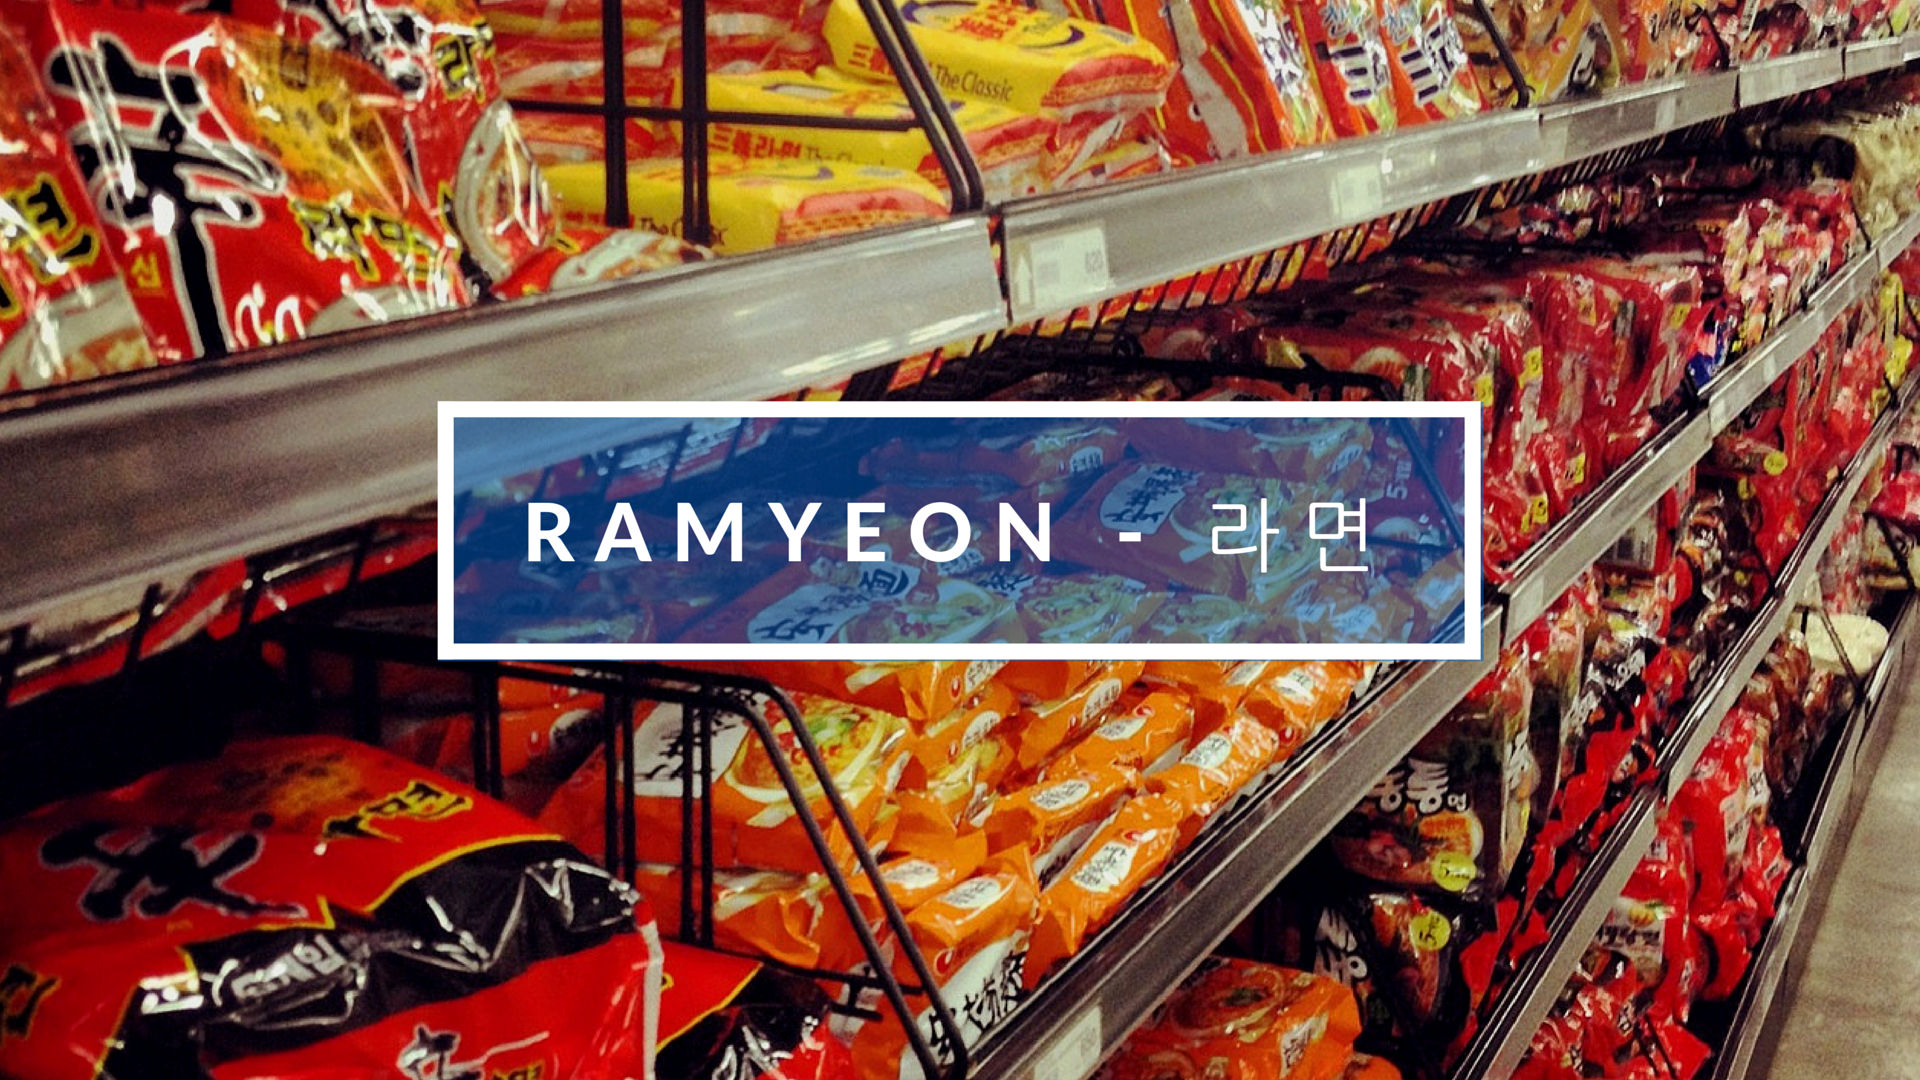 For the love of Ramyeon